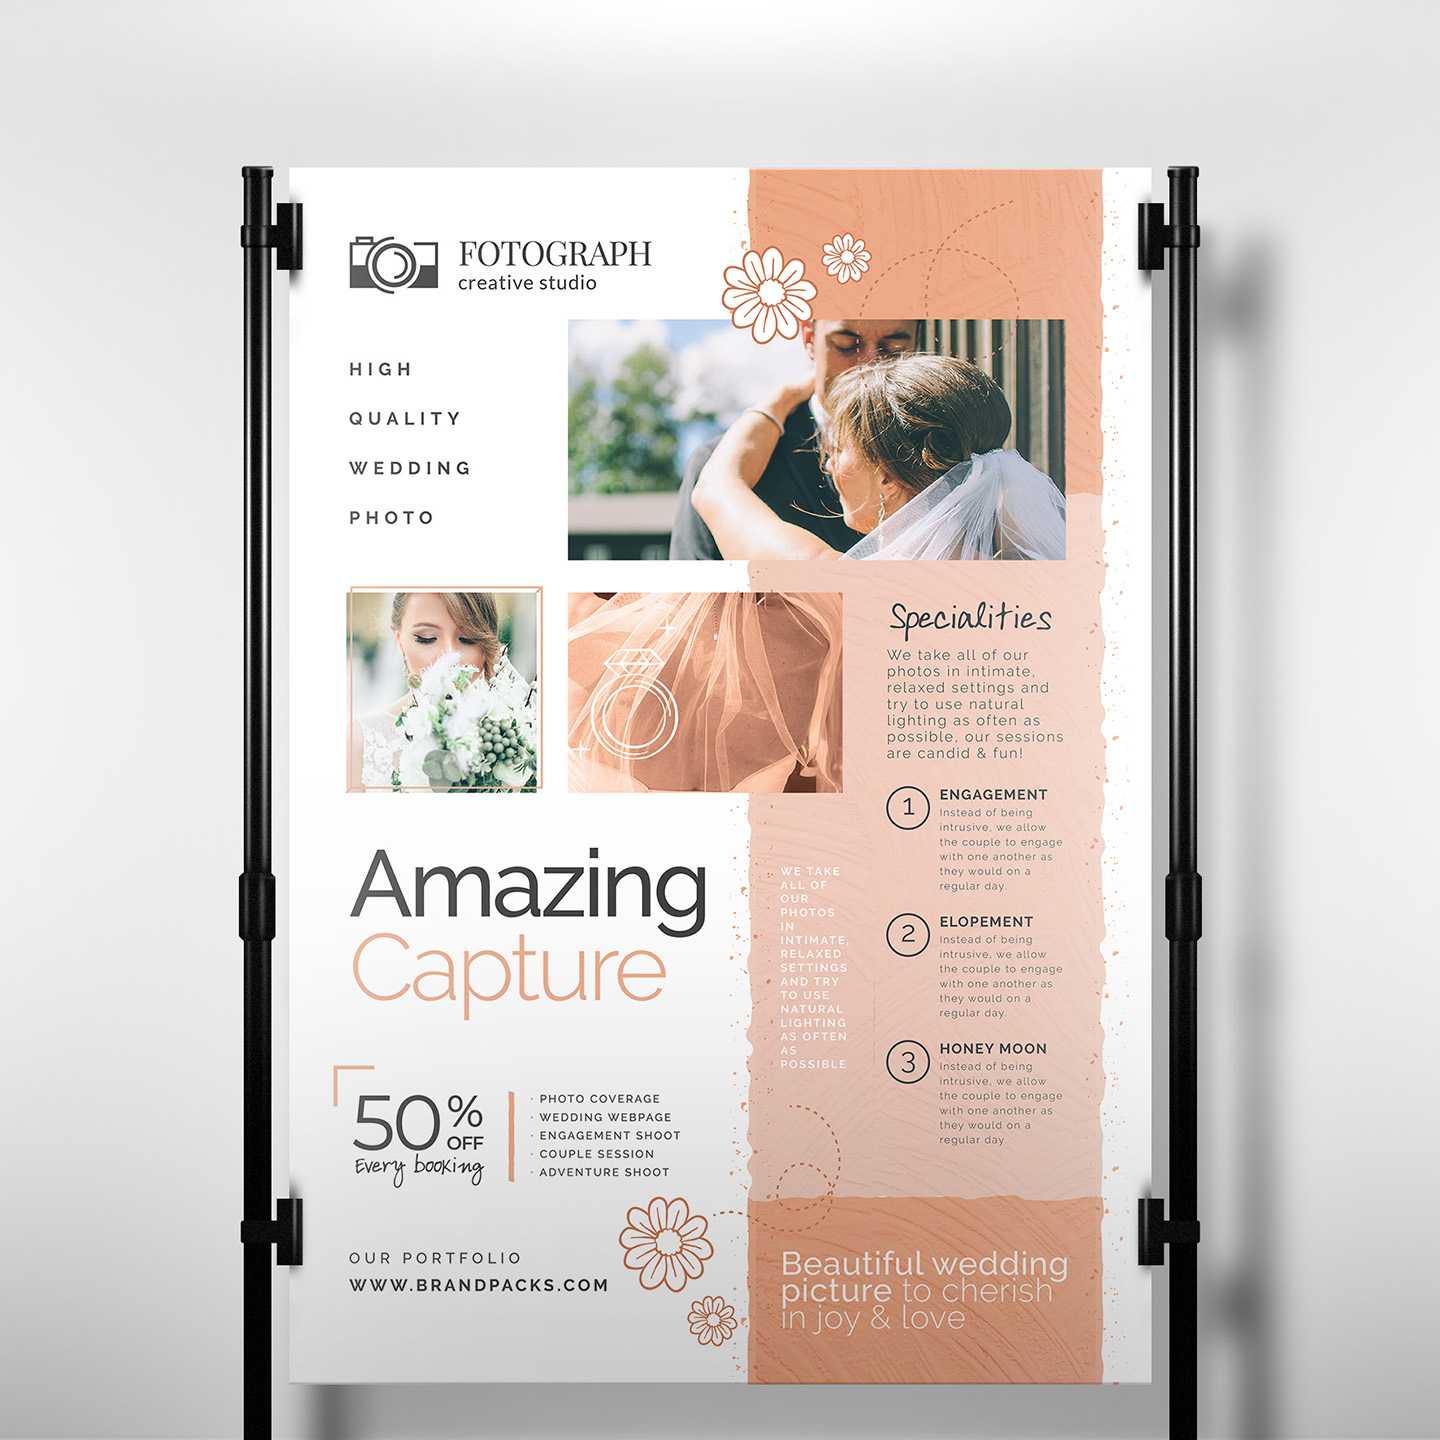 Photography Service Banner Template - Psd, Ai & Vector Throughout Photography Banner Template